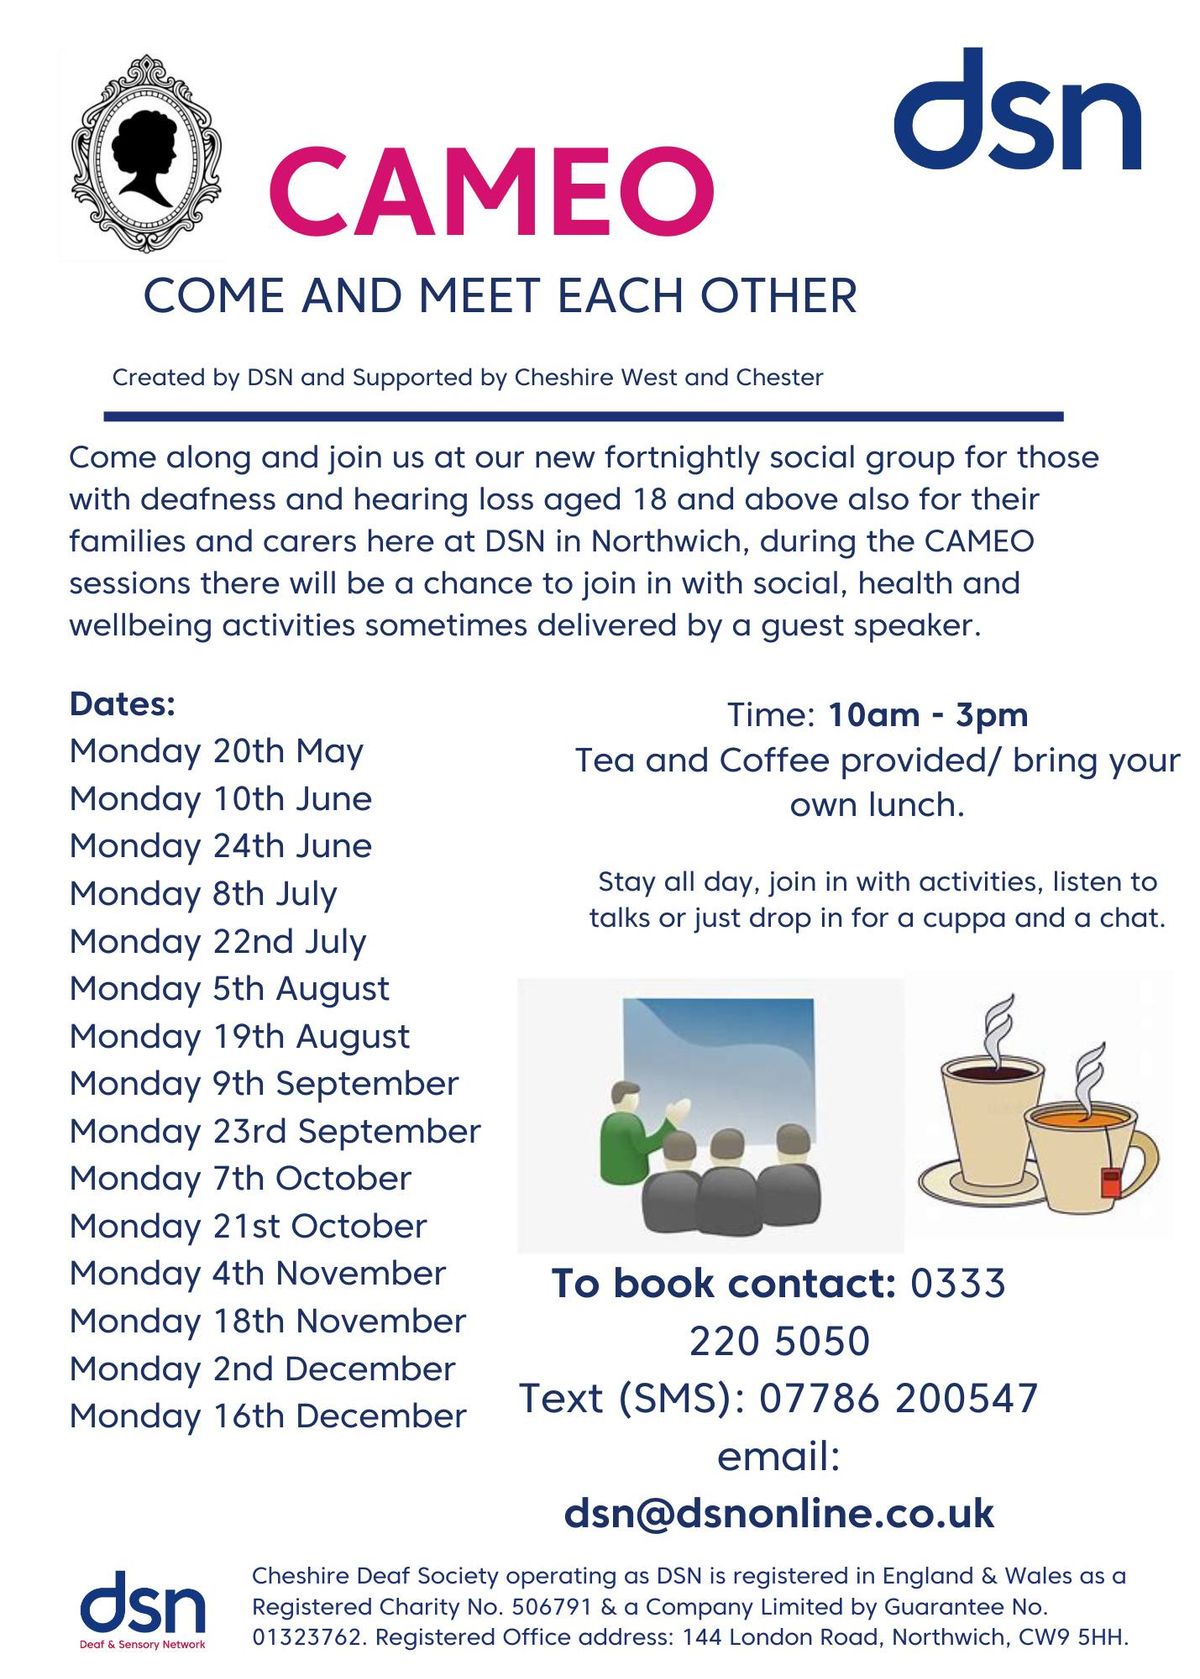 CAMEO - Come And Meet Each Other in Northwich (Deaf Community Event)